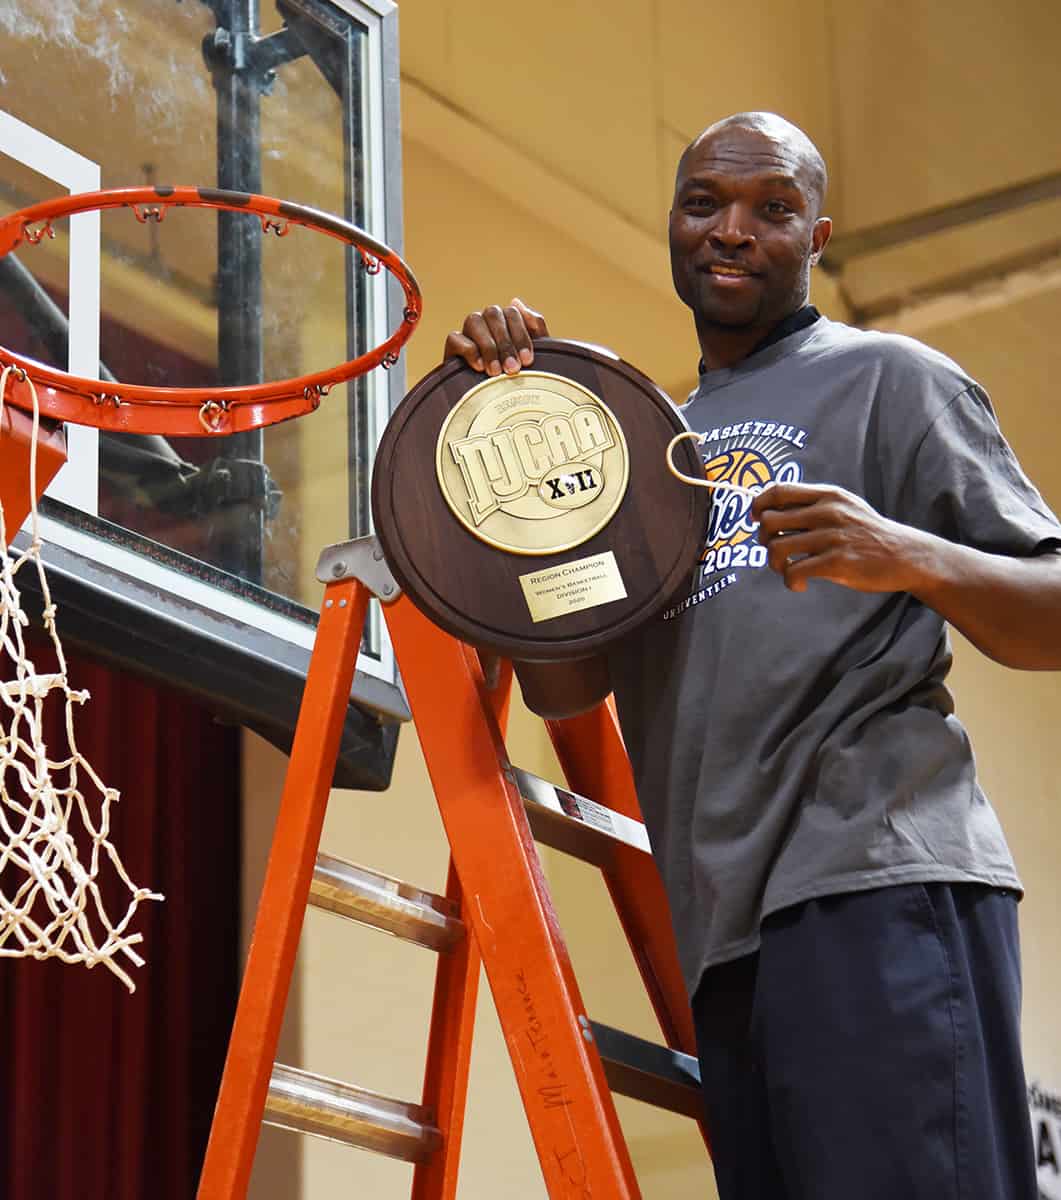 Demetrius Colson is shown above cutting down the net after the Lady Jets won the 2019 – 2020 NJCAA Region XVII championship.